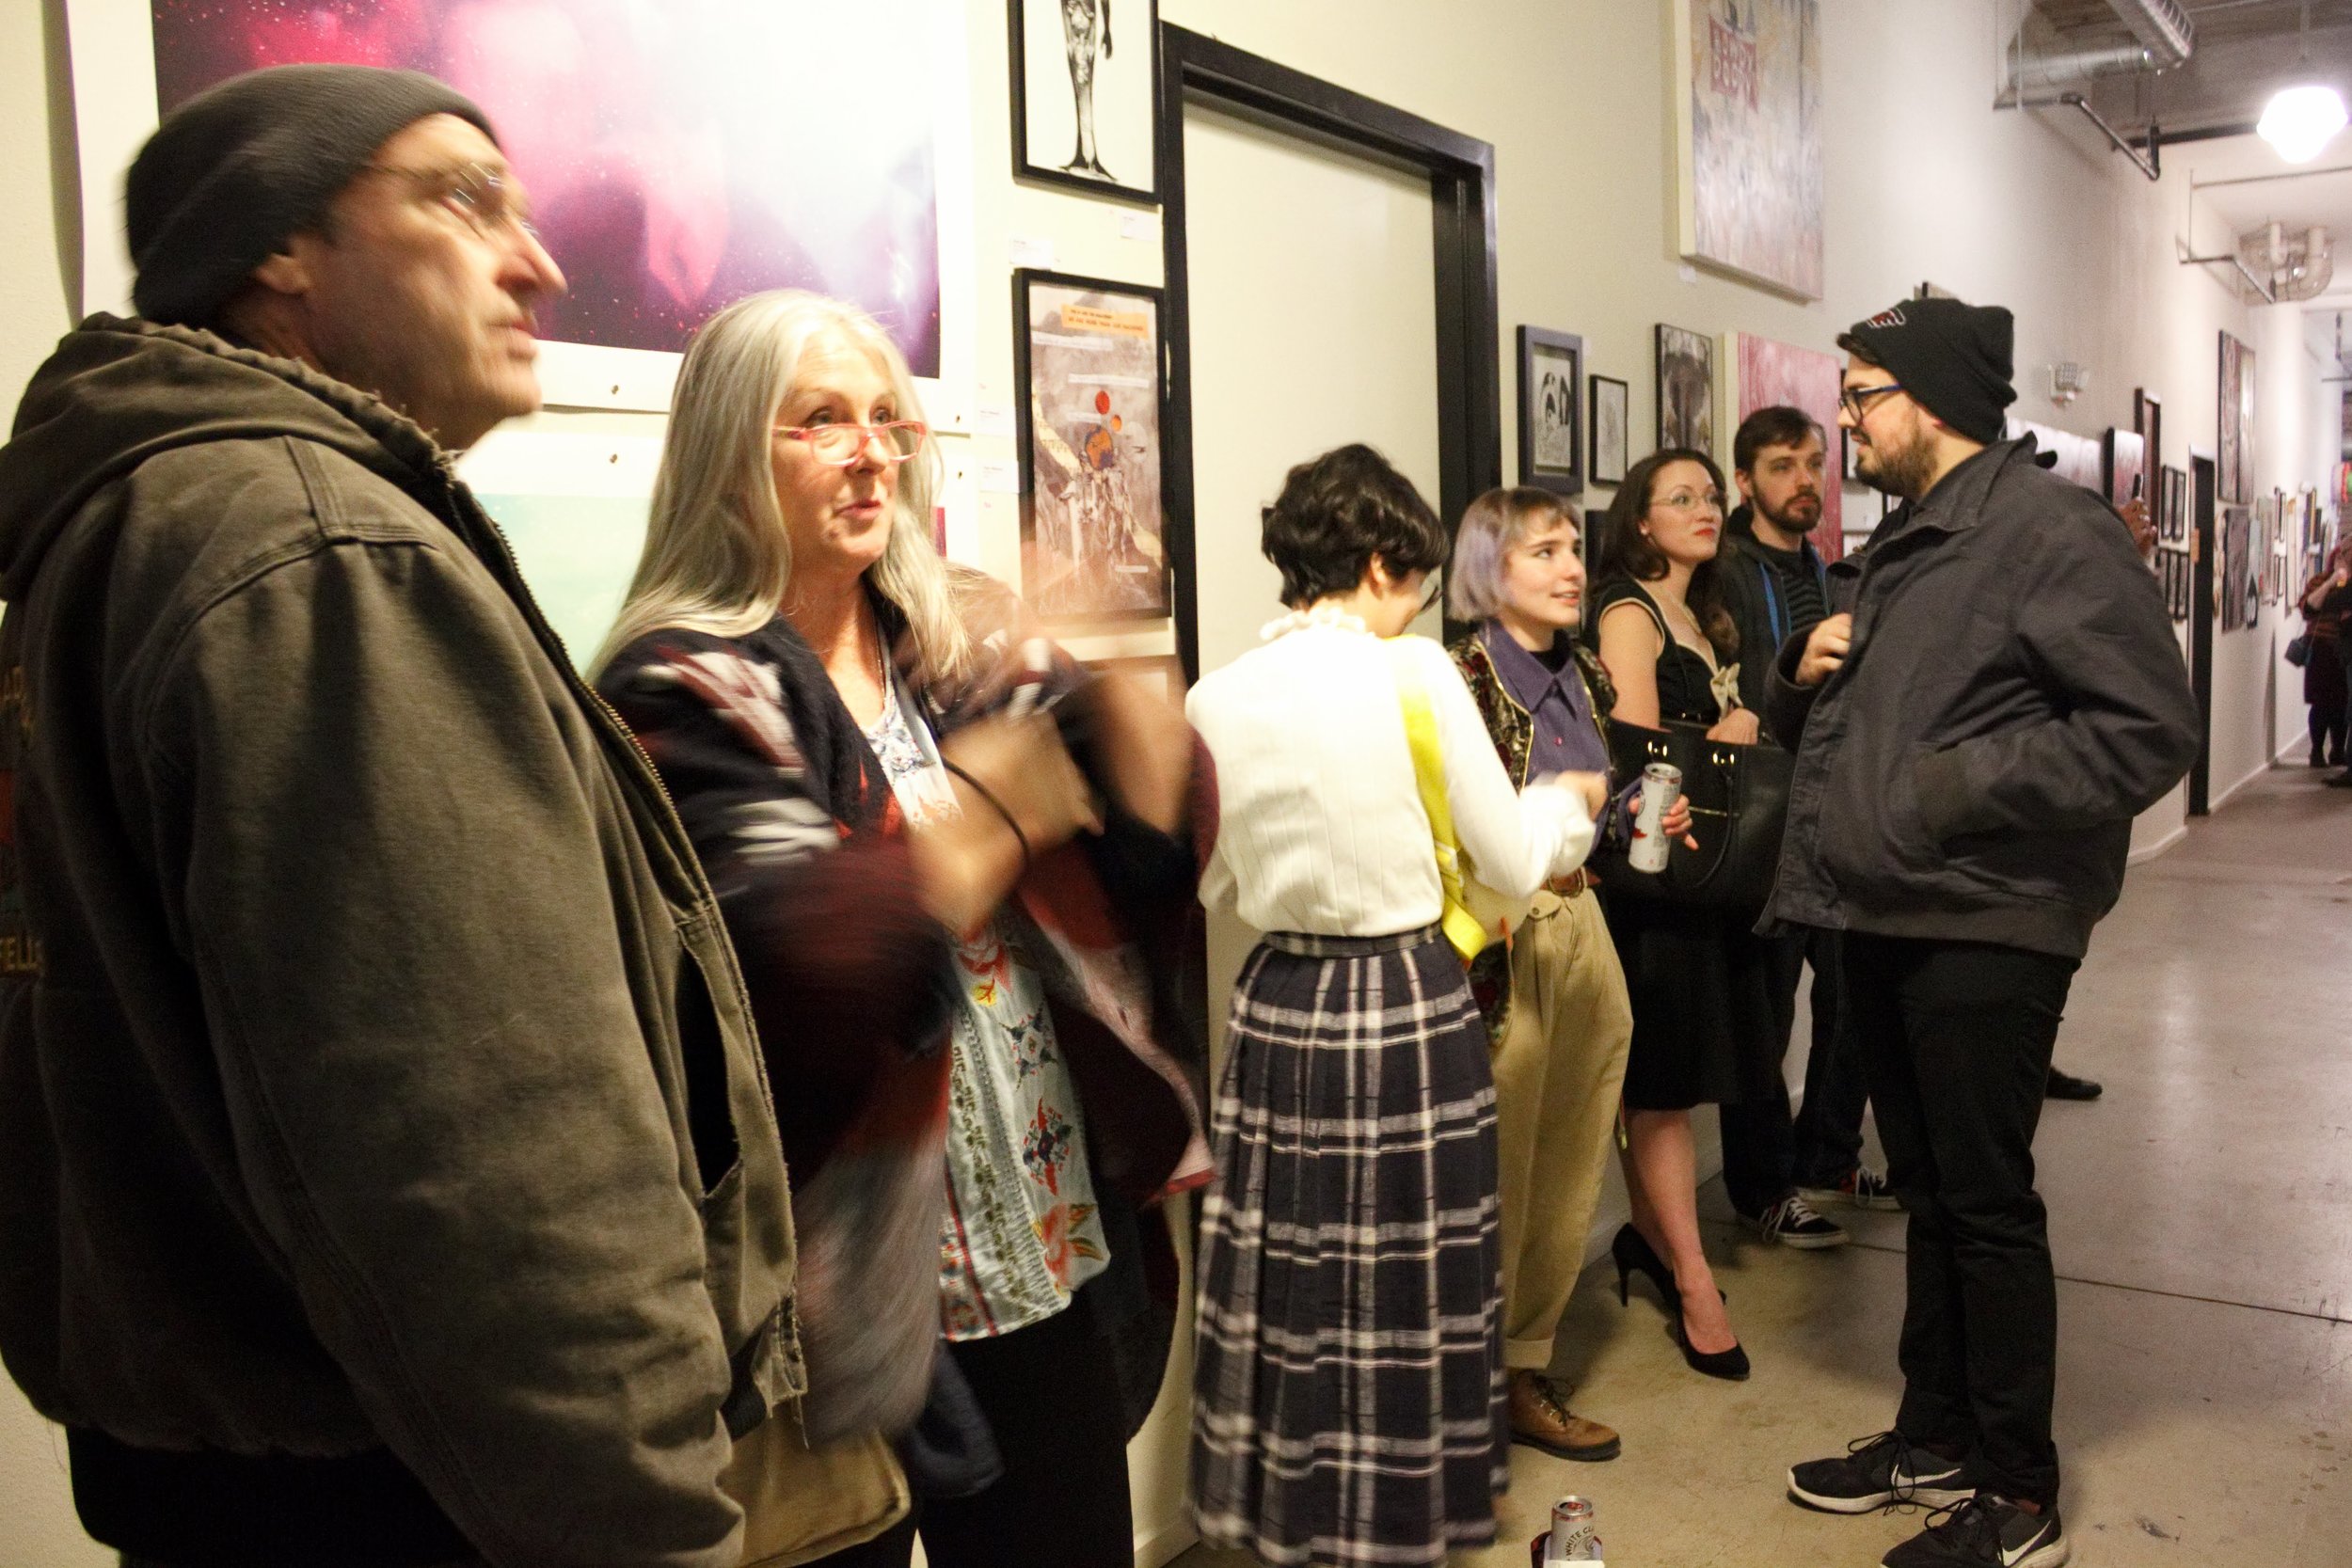 Noah LeGrand and friends at "Fuck Your Art Degree" at Shipping and Receiving, March 2nd, 2019